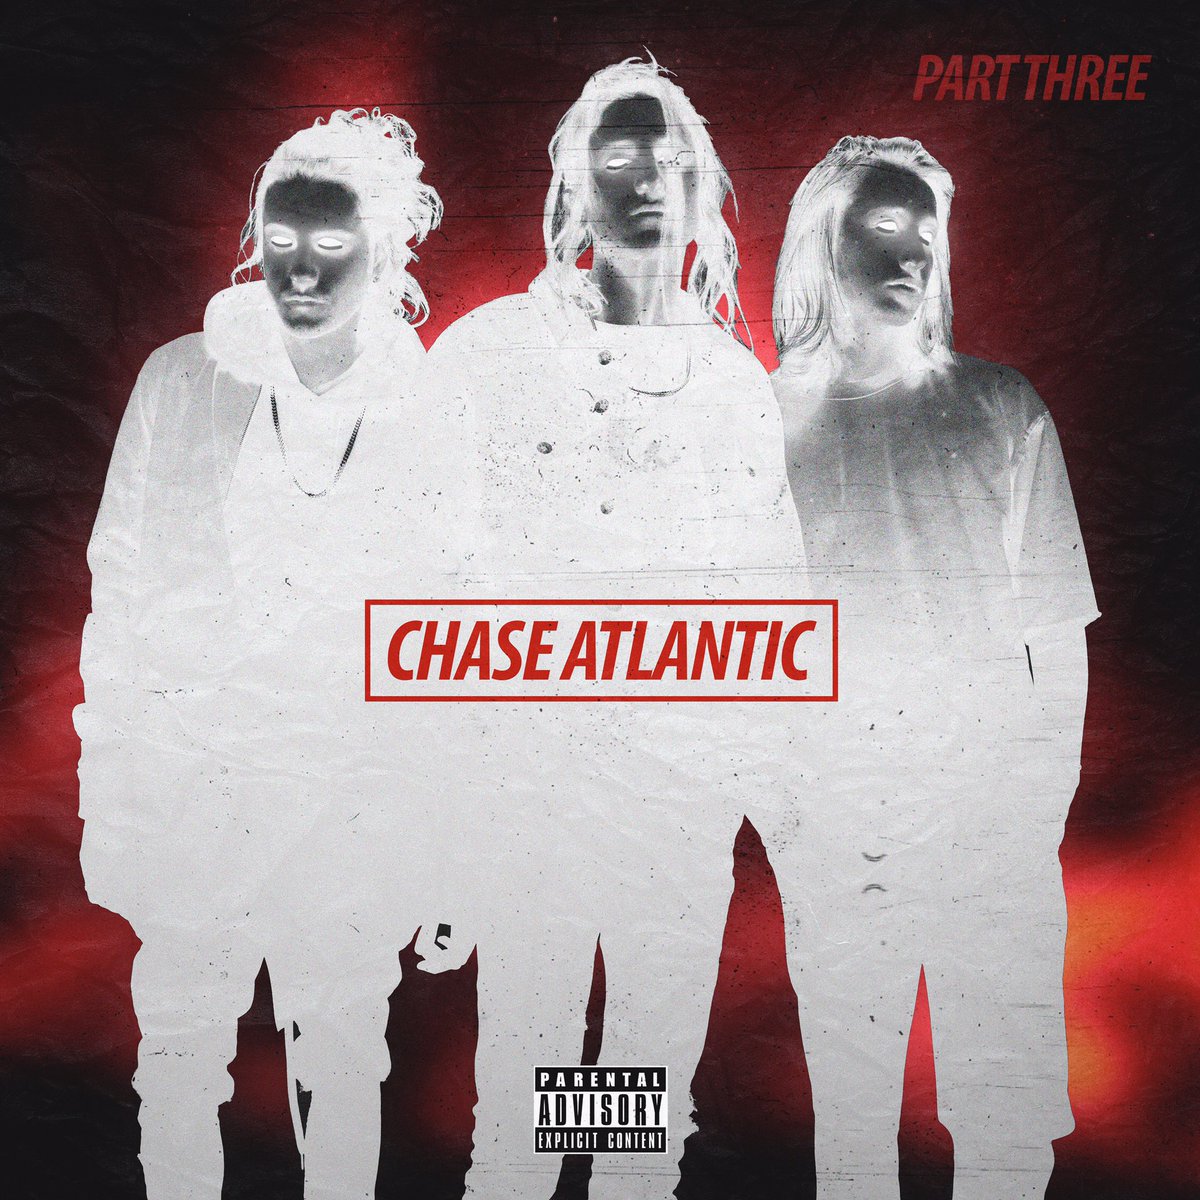 RT @ChaseAtlantic: PART 3 // OUT NOW 

https://t.co/yGH0BjNsIB
https://t.co/WZZ5leGCKg https://t.co/uTFCez8tUW